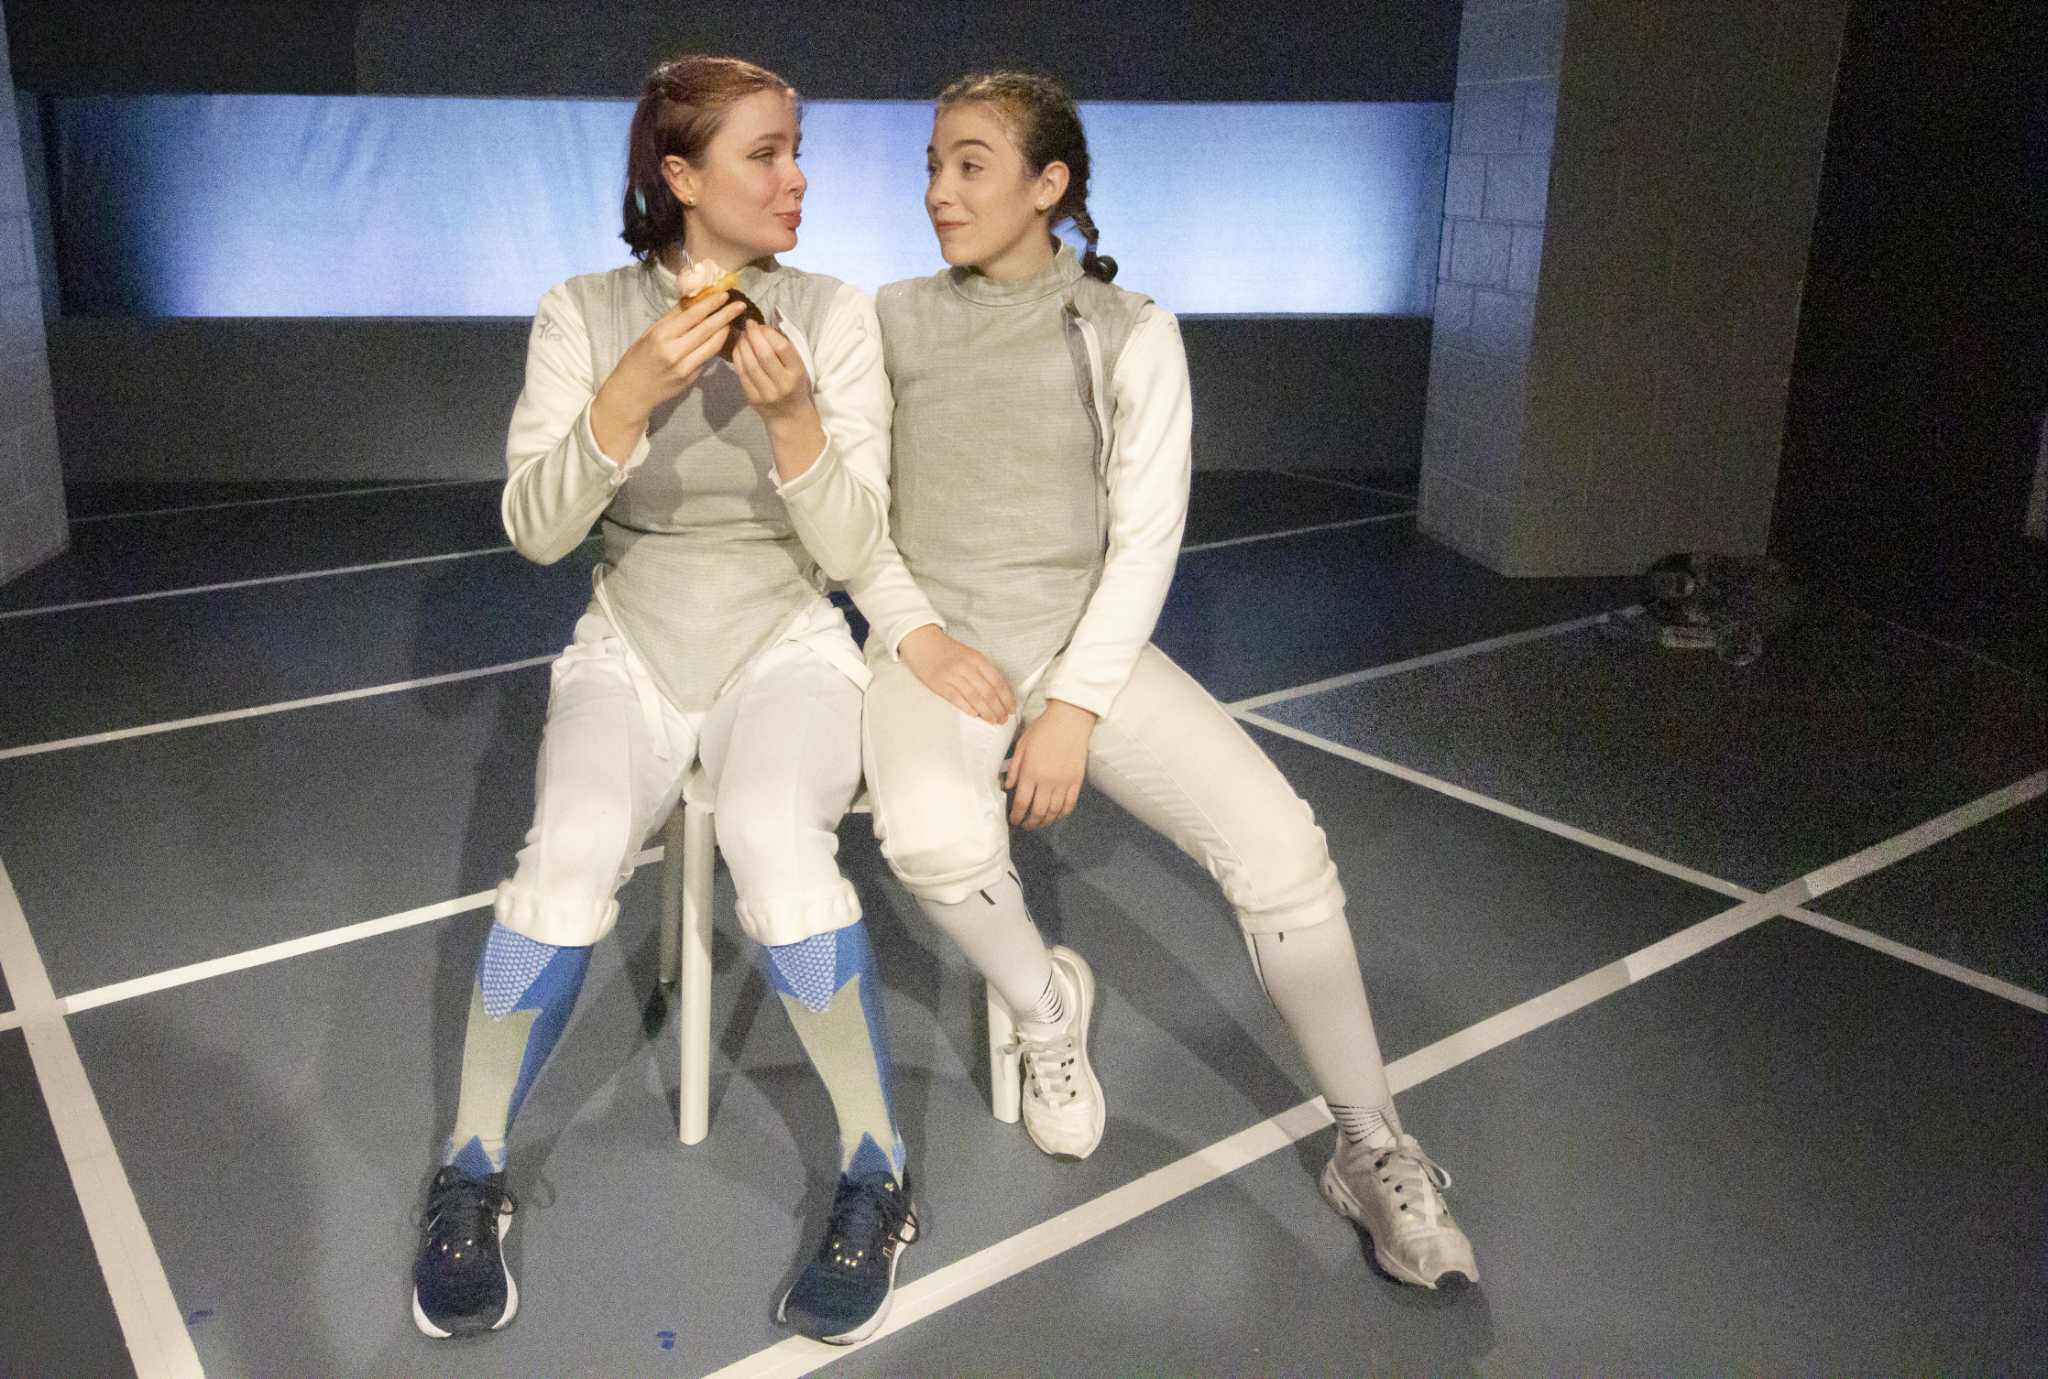 Thrown Stone Theatre staging Olympic fencing contest play with ‘Athena’